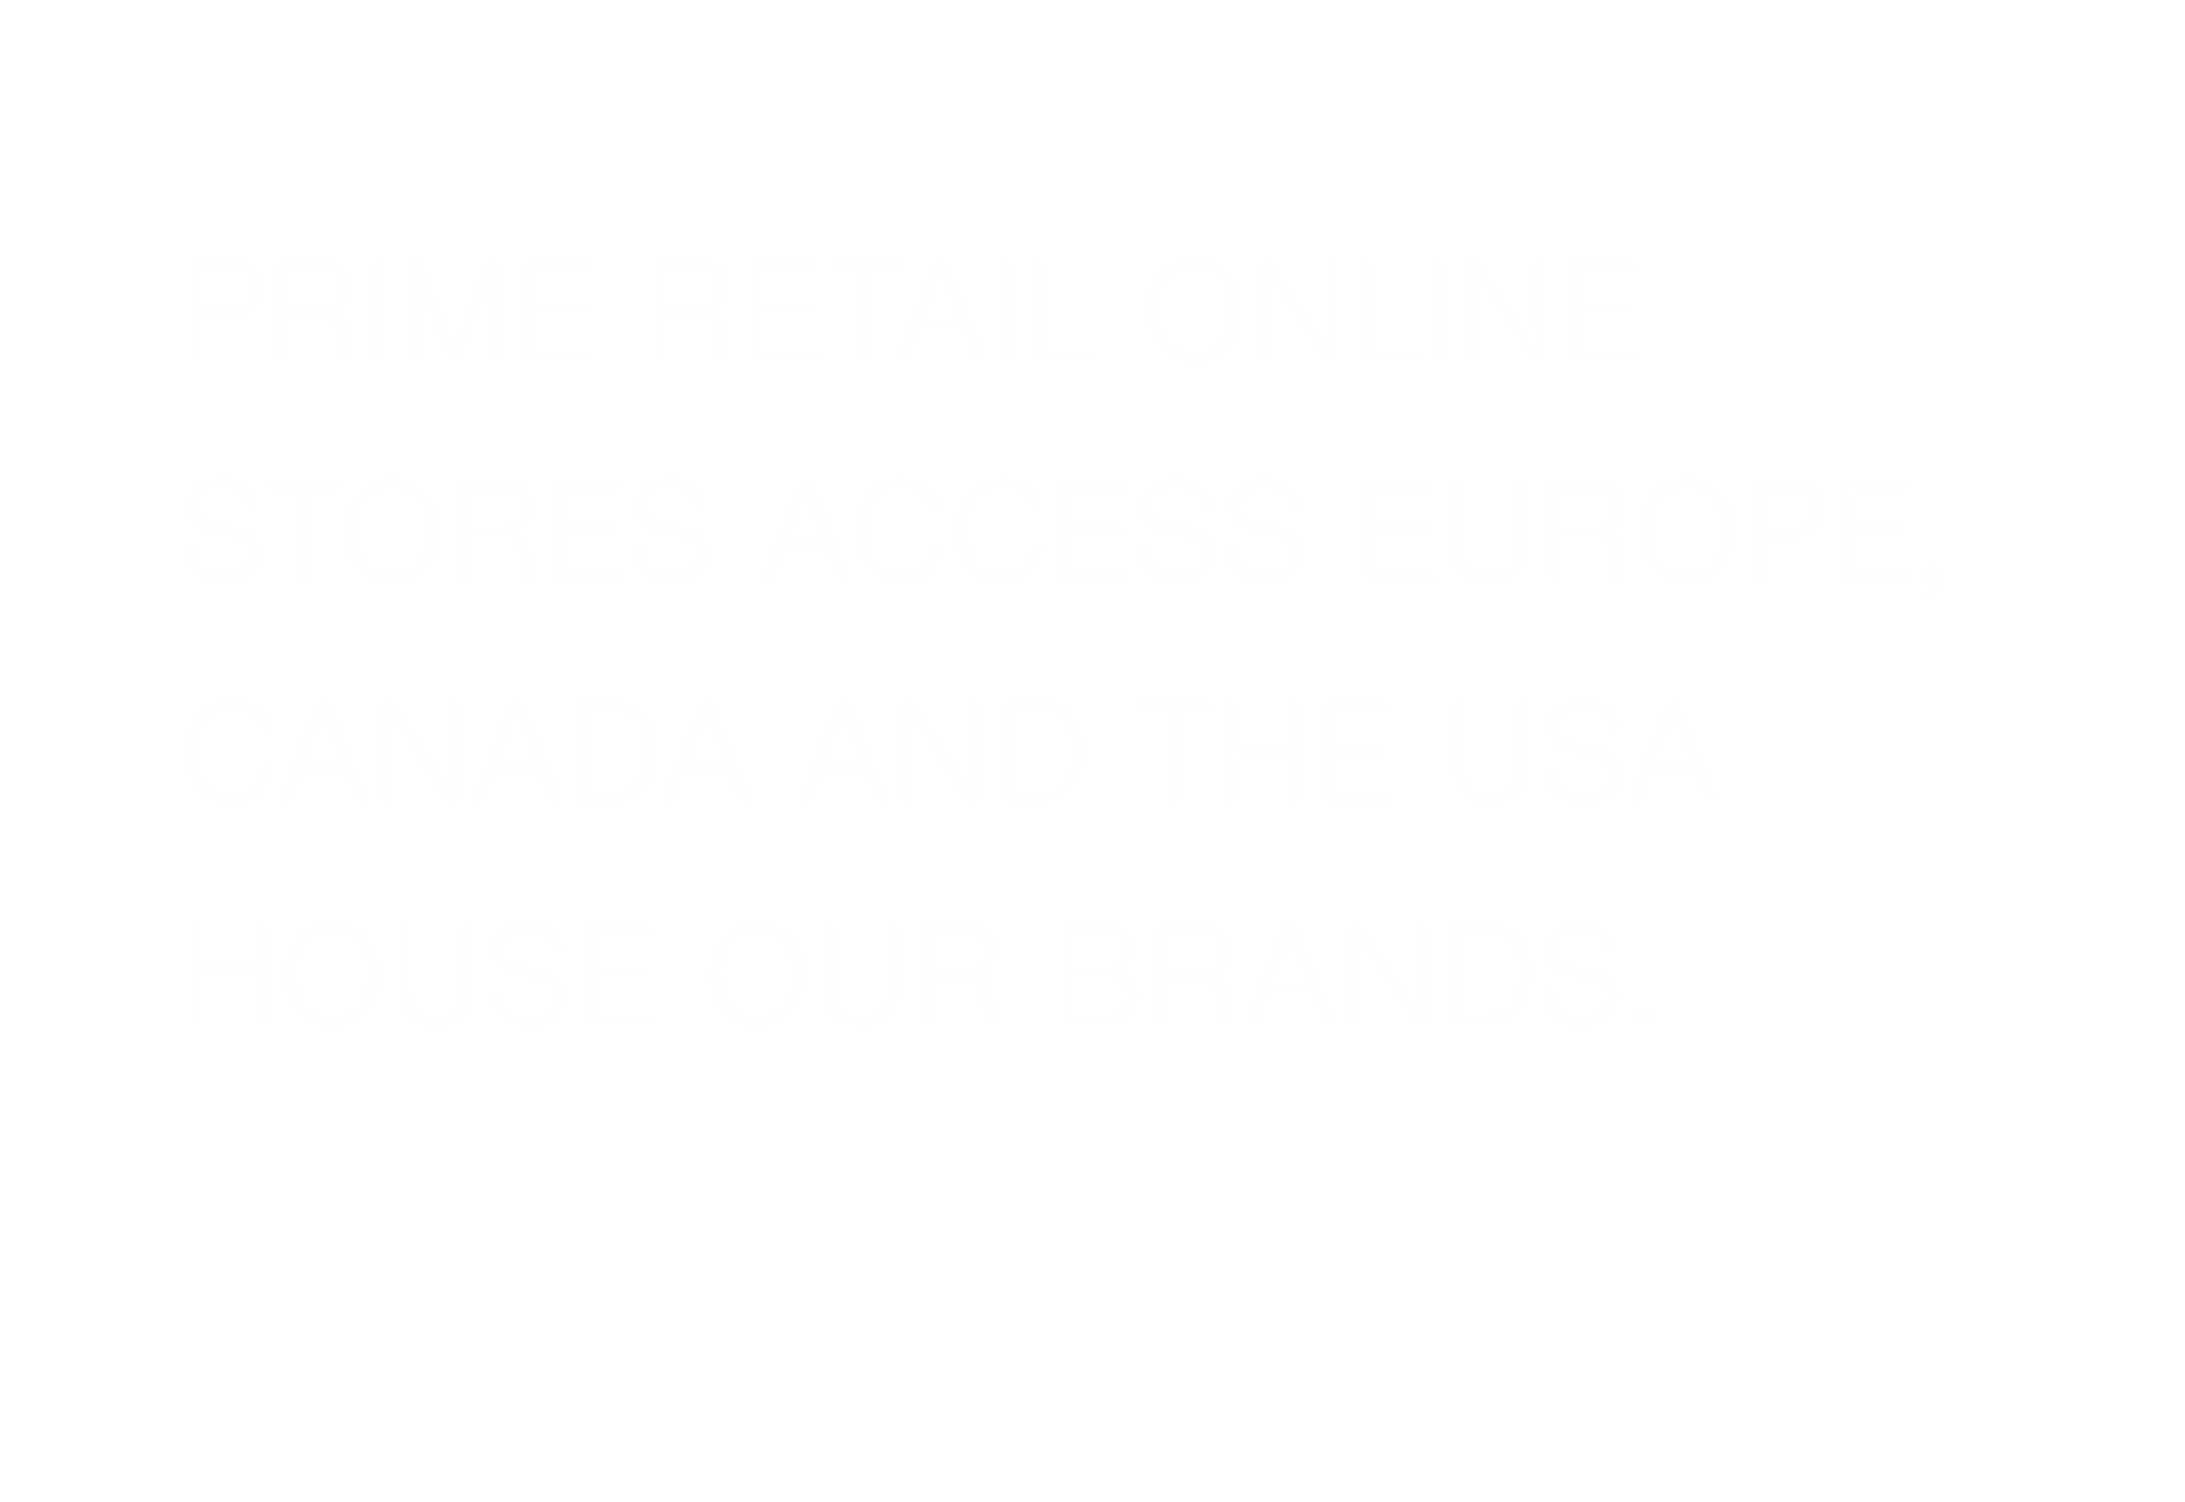 Prime Retail Online Stores Across Europe, Canada and The USA House Our Brands